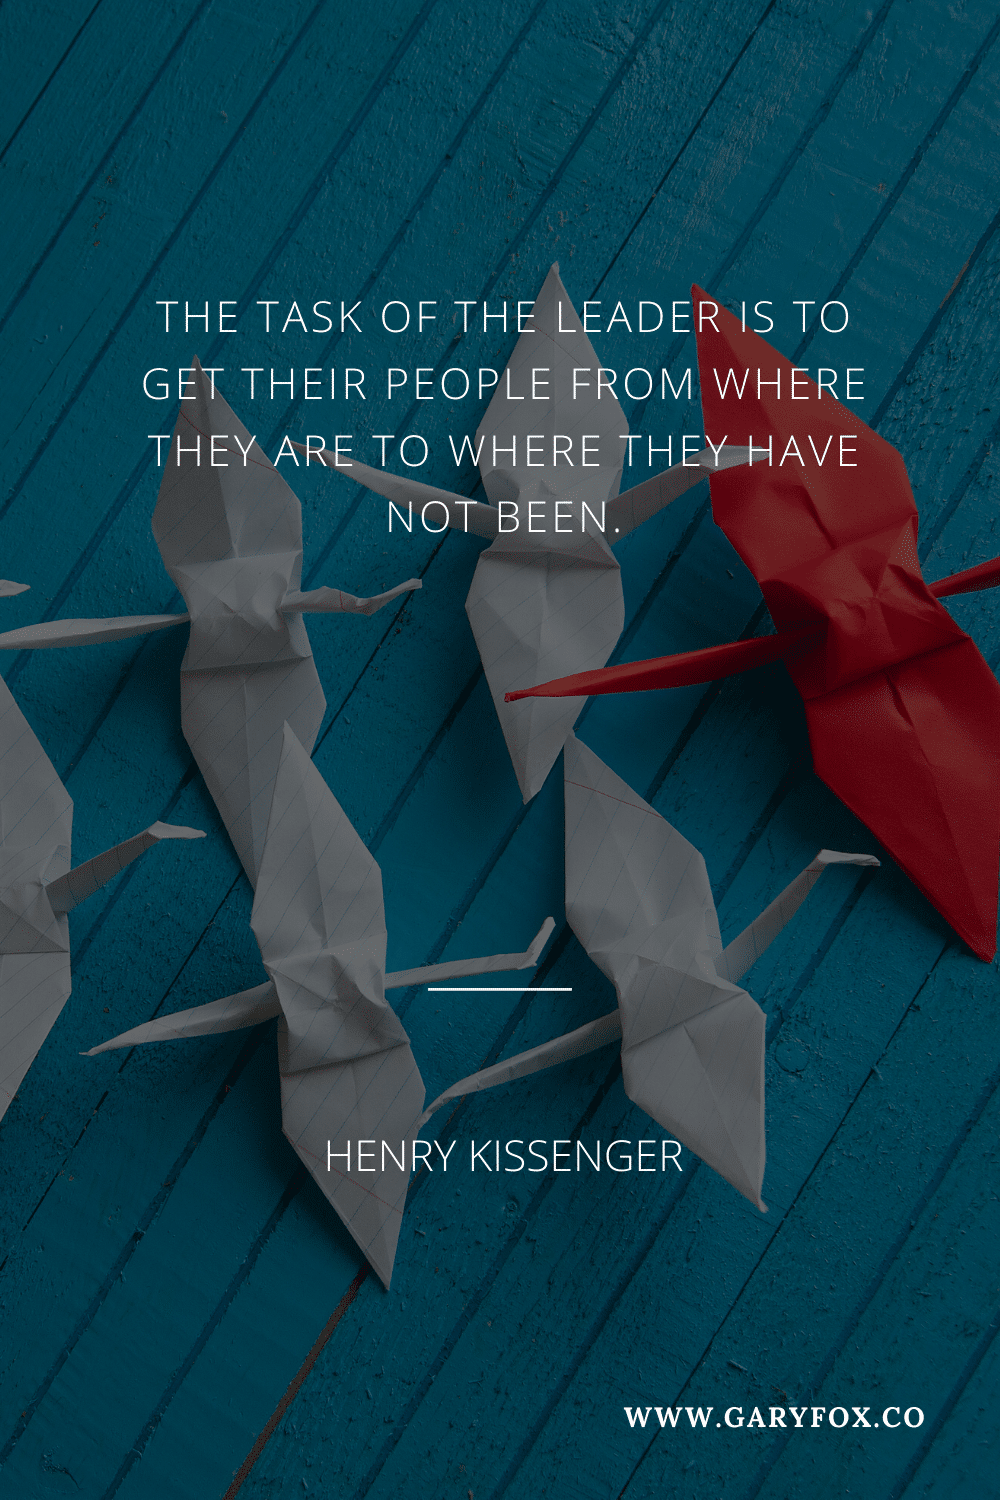 The Task Of The Leader Is To Get Their People From Where They Are To Where They Have Not Been. - Henry Kissenger